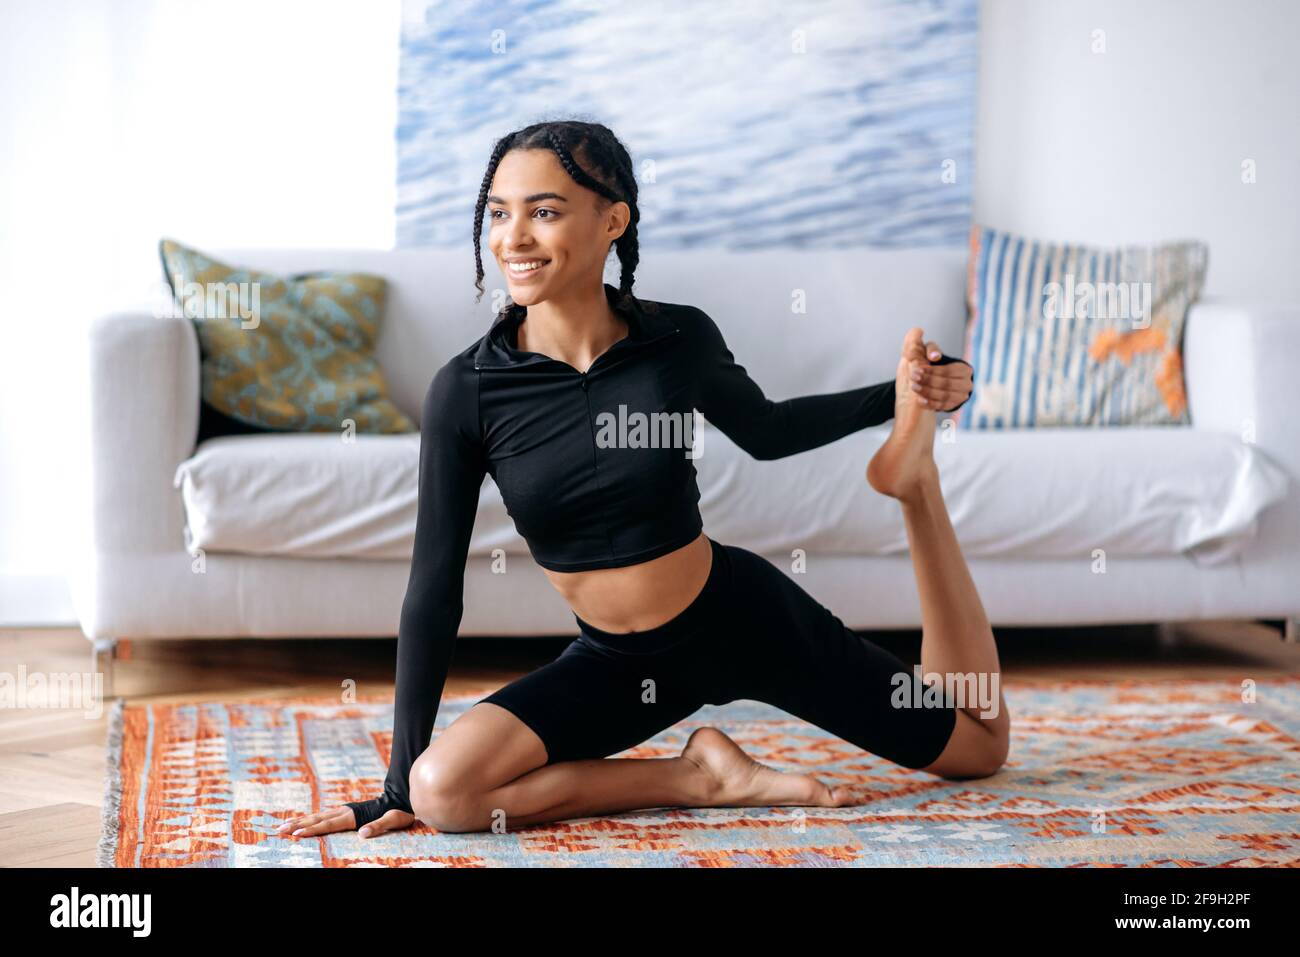 https://c8.alamy.com/comp/2F9H2PF/flexible-young-beautiful-african-american-woman-in-sportswear-is-engaged-fitness-leads-a-healthy-lifestyle-does-stretching-at-home-on-a-floor-smiles-looks-happy-2F9H2PF.jpg